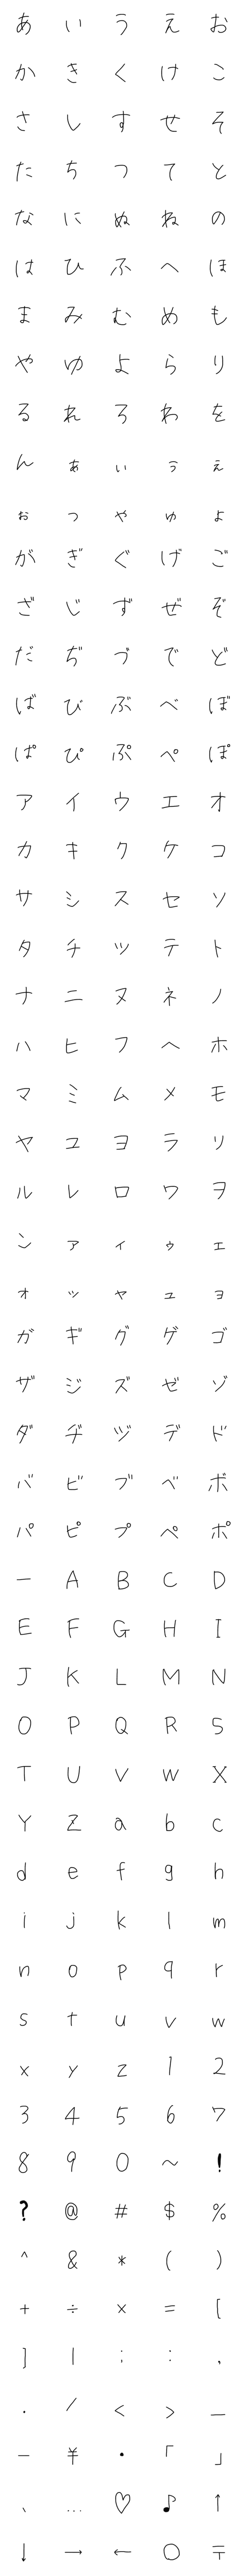 [LINE絵文字]手書き文字「SATOフォント」かな英数字の画像一覧